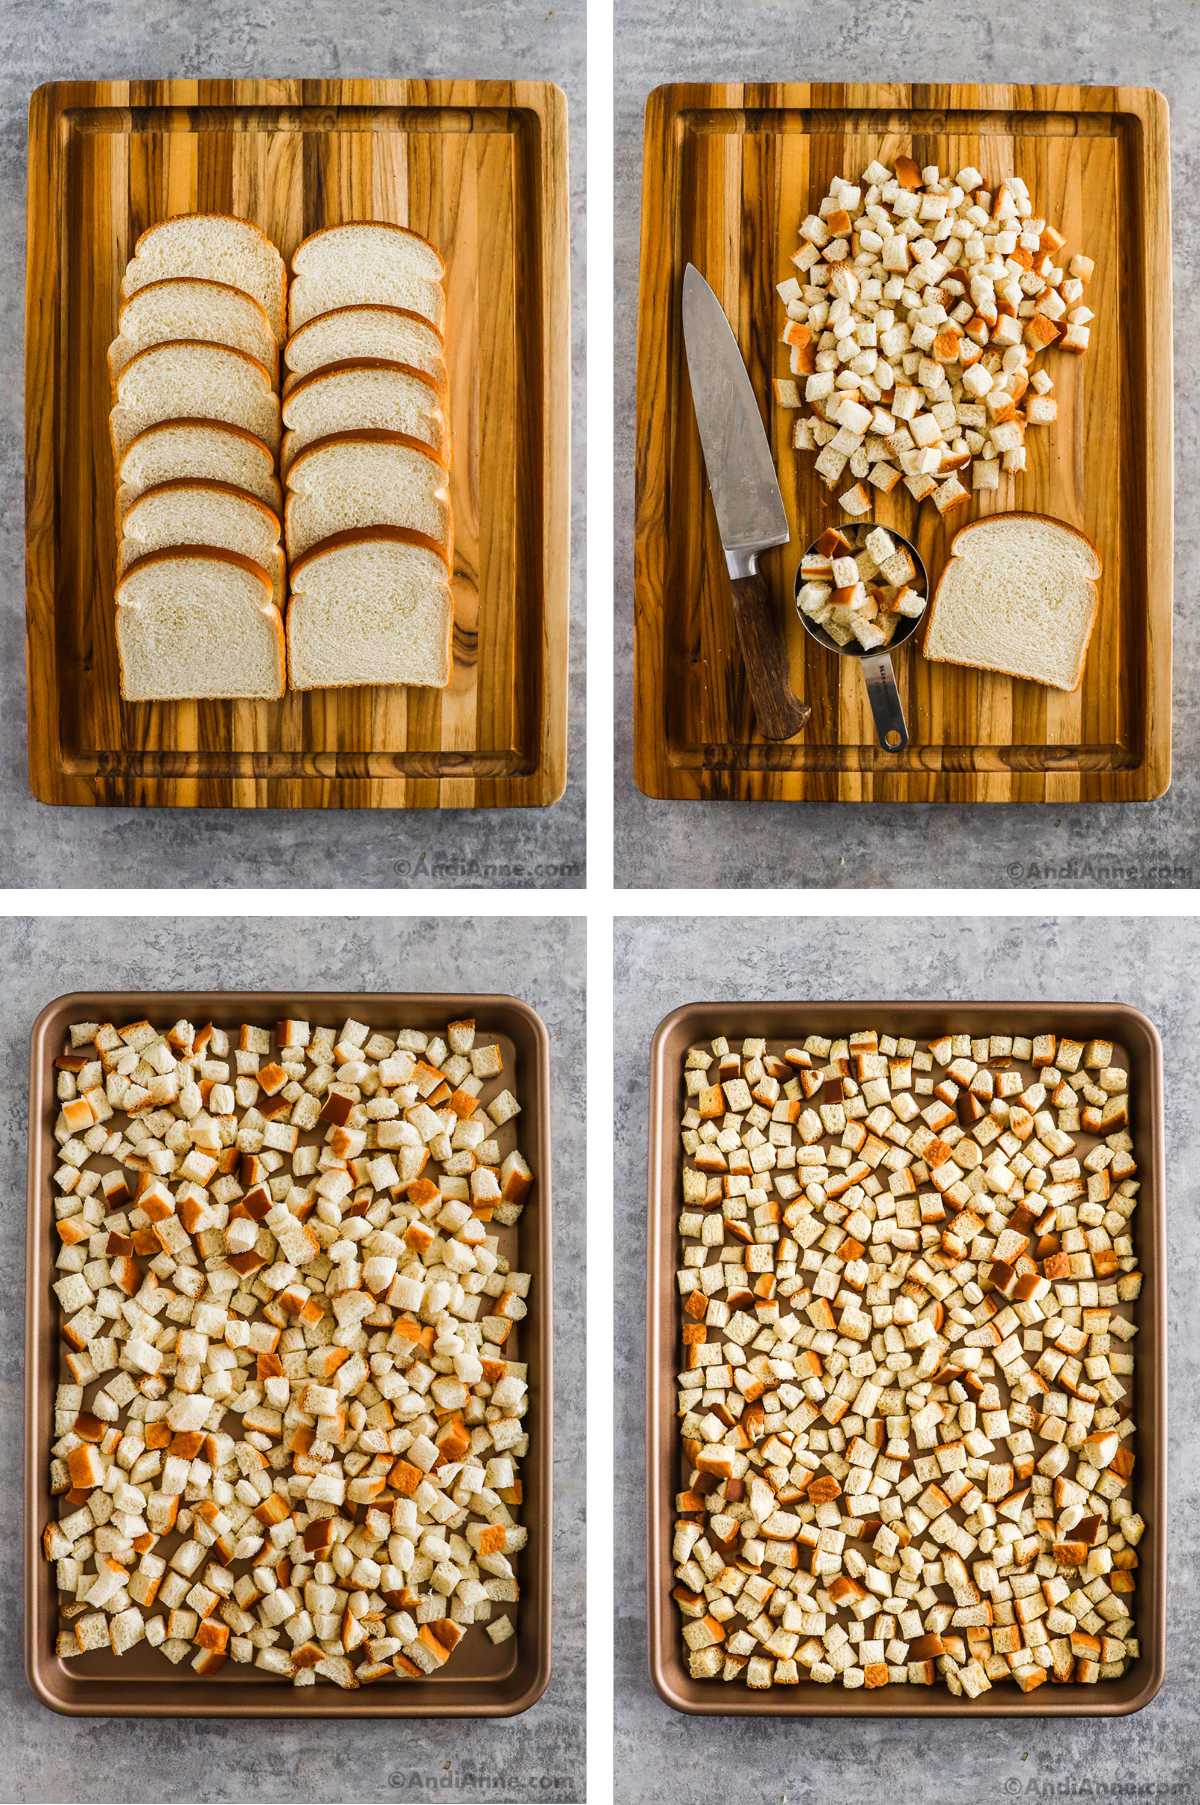 Four overhead images in one: 1. 10 bread slices on a wooden cutting board. 2. Bread sliced into cubes with a chef knife. 3. Cubes of bread on a baking sheet. 4. Cubes of bread on baking sheet baked. 